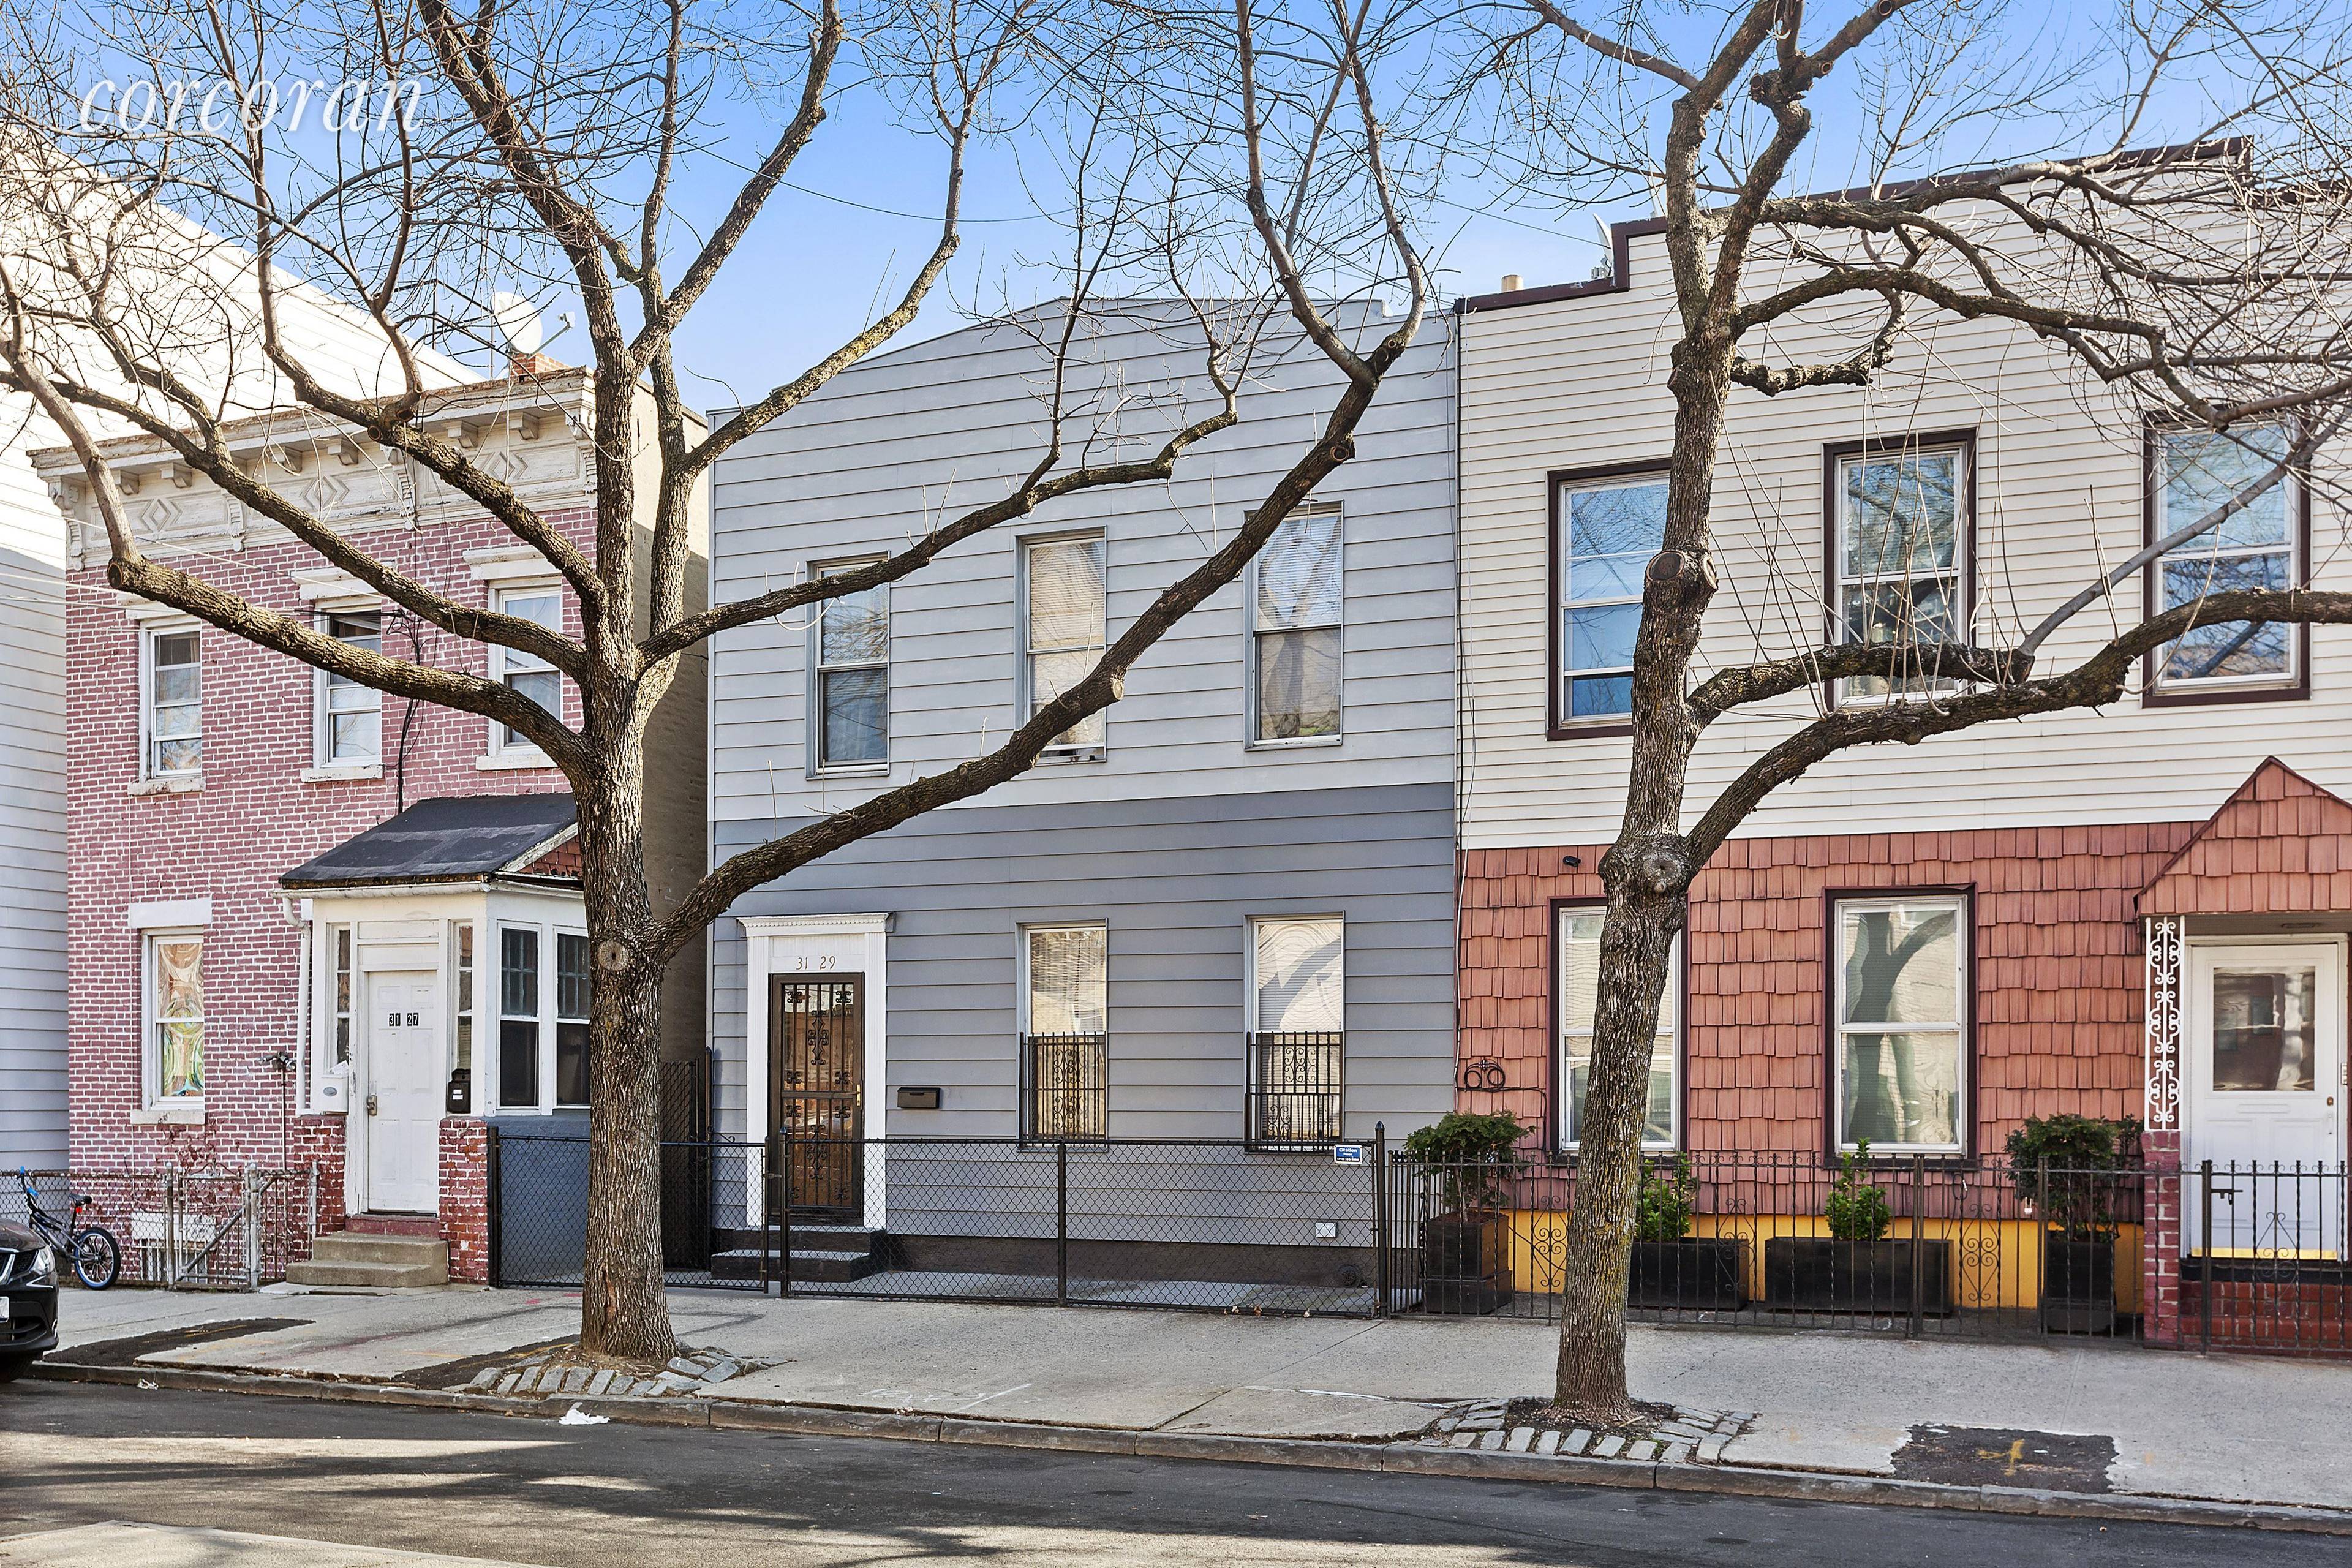 Located on a picturesque, quiet tree lined street in Astoria lies a beautifully rare 22 foot wide house.